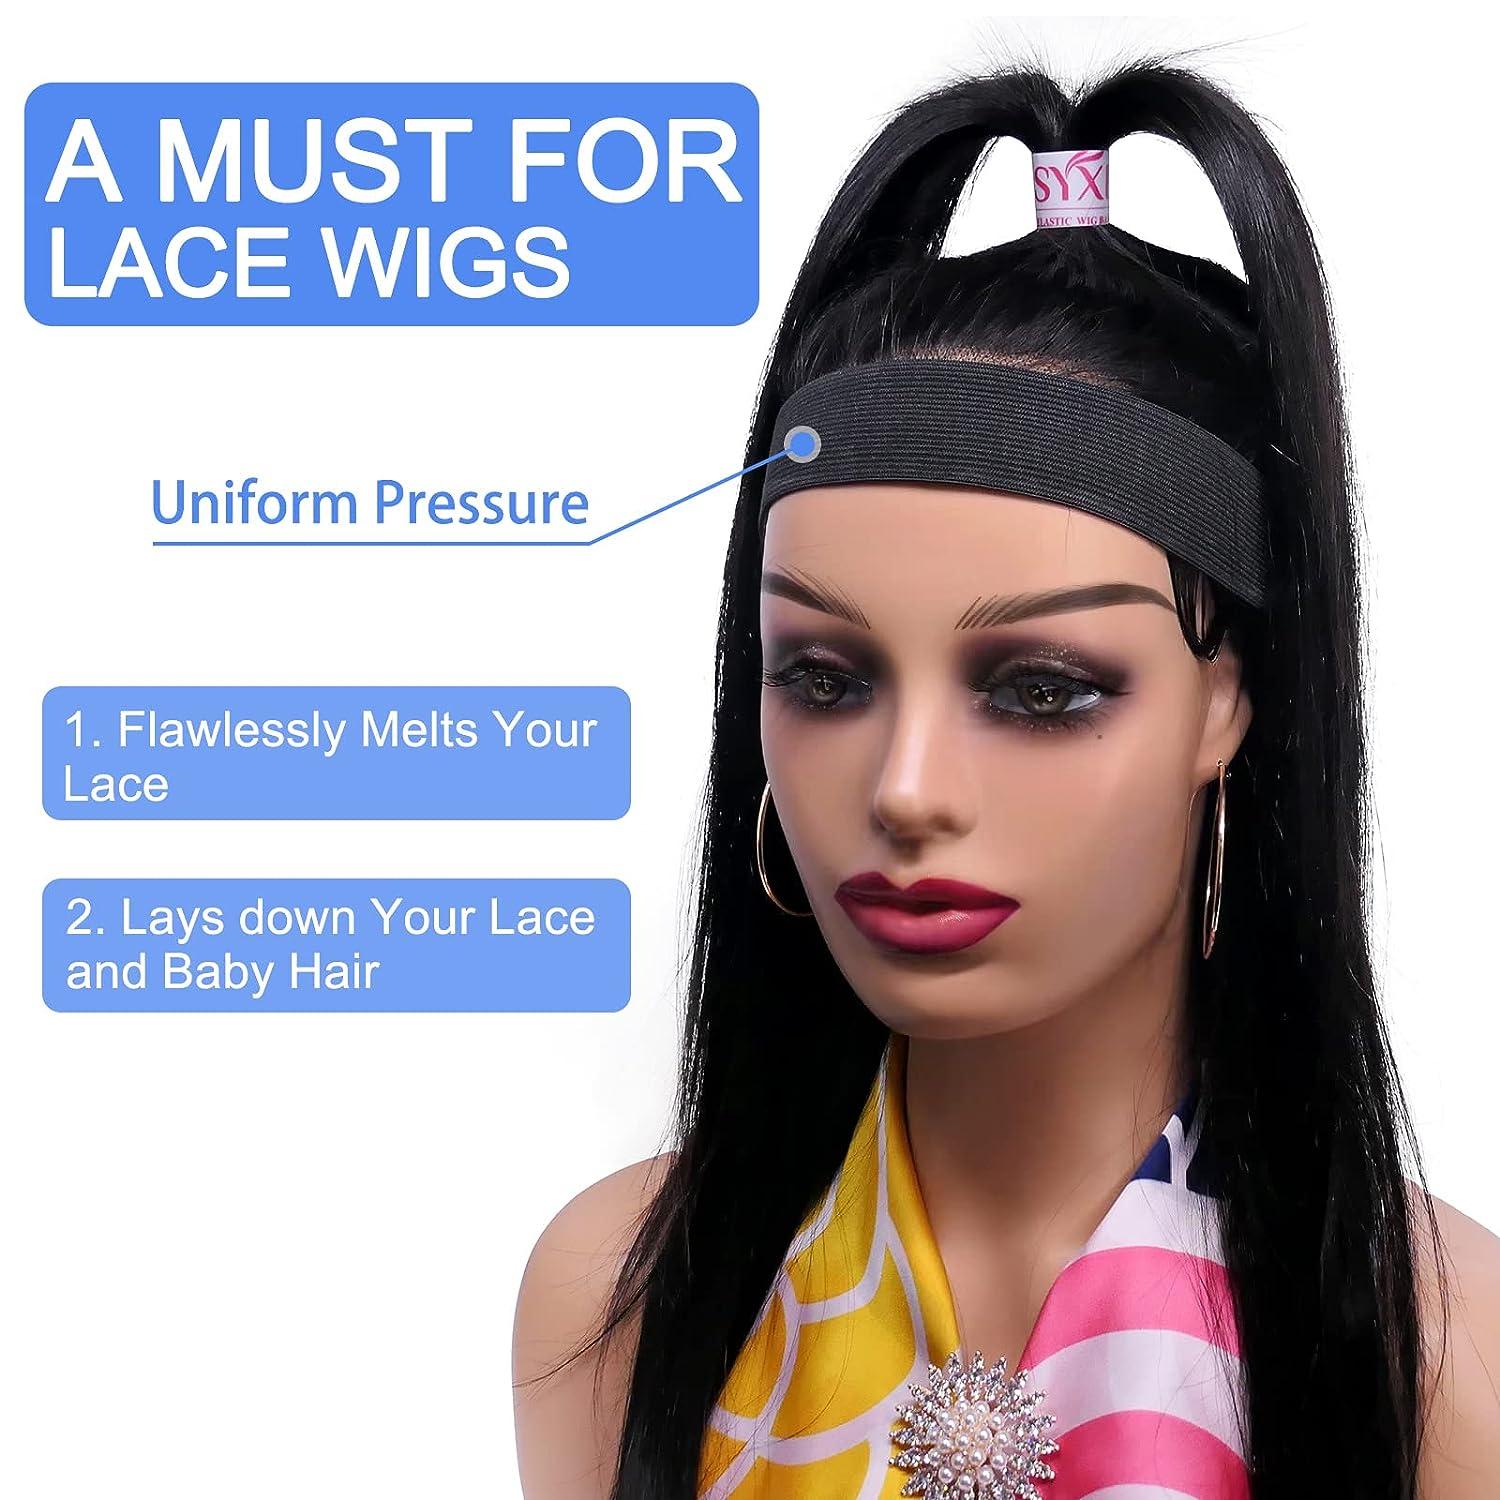 Elastic Bands For Wig,lace Front Wig Edge Band For Women,lace Melting Band  For Wigs And Baby Hair,wig Bands For Keeping Wigs In ,wig Grip Band Edge  Wrap To Lay Edges,wig Accessories 